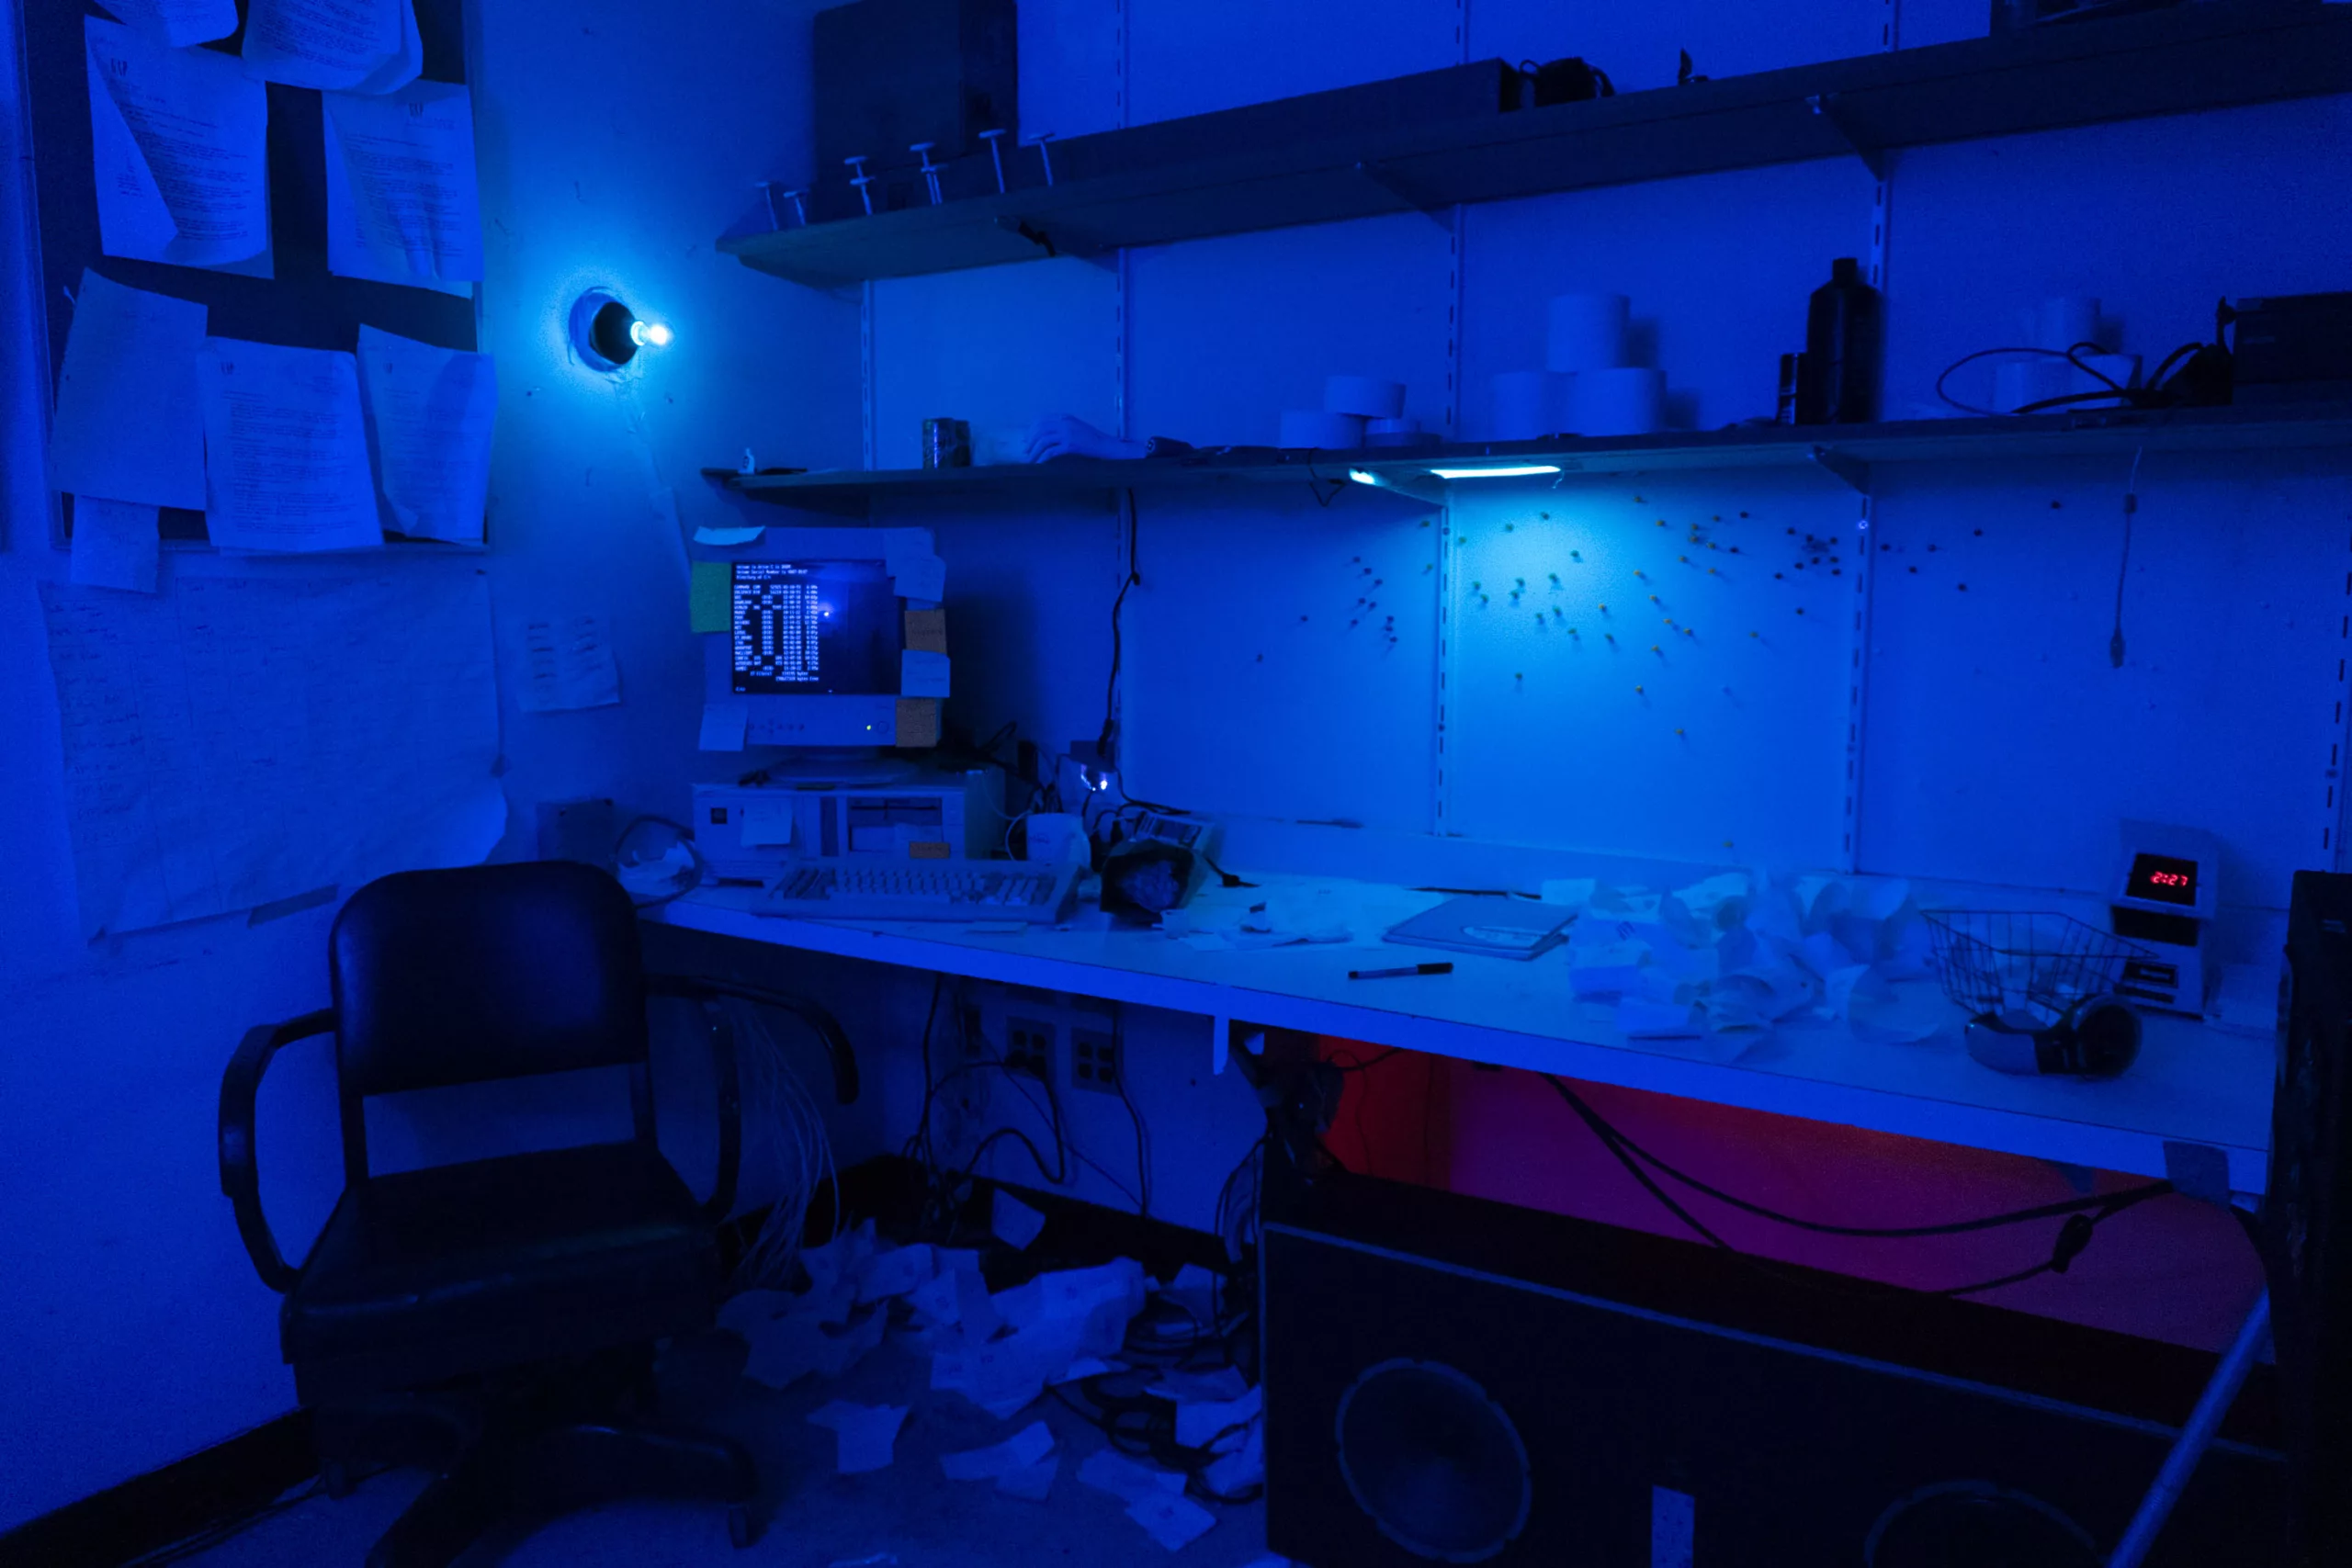 A messy managers office is bathed in supersaturated blue light. Papers are strewn everywhere - on the desk, on the floor, and on the walls. An old computer sits in the corner with the terminal open.